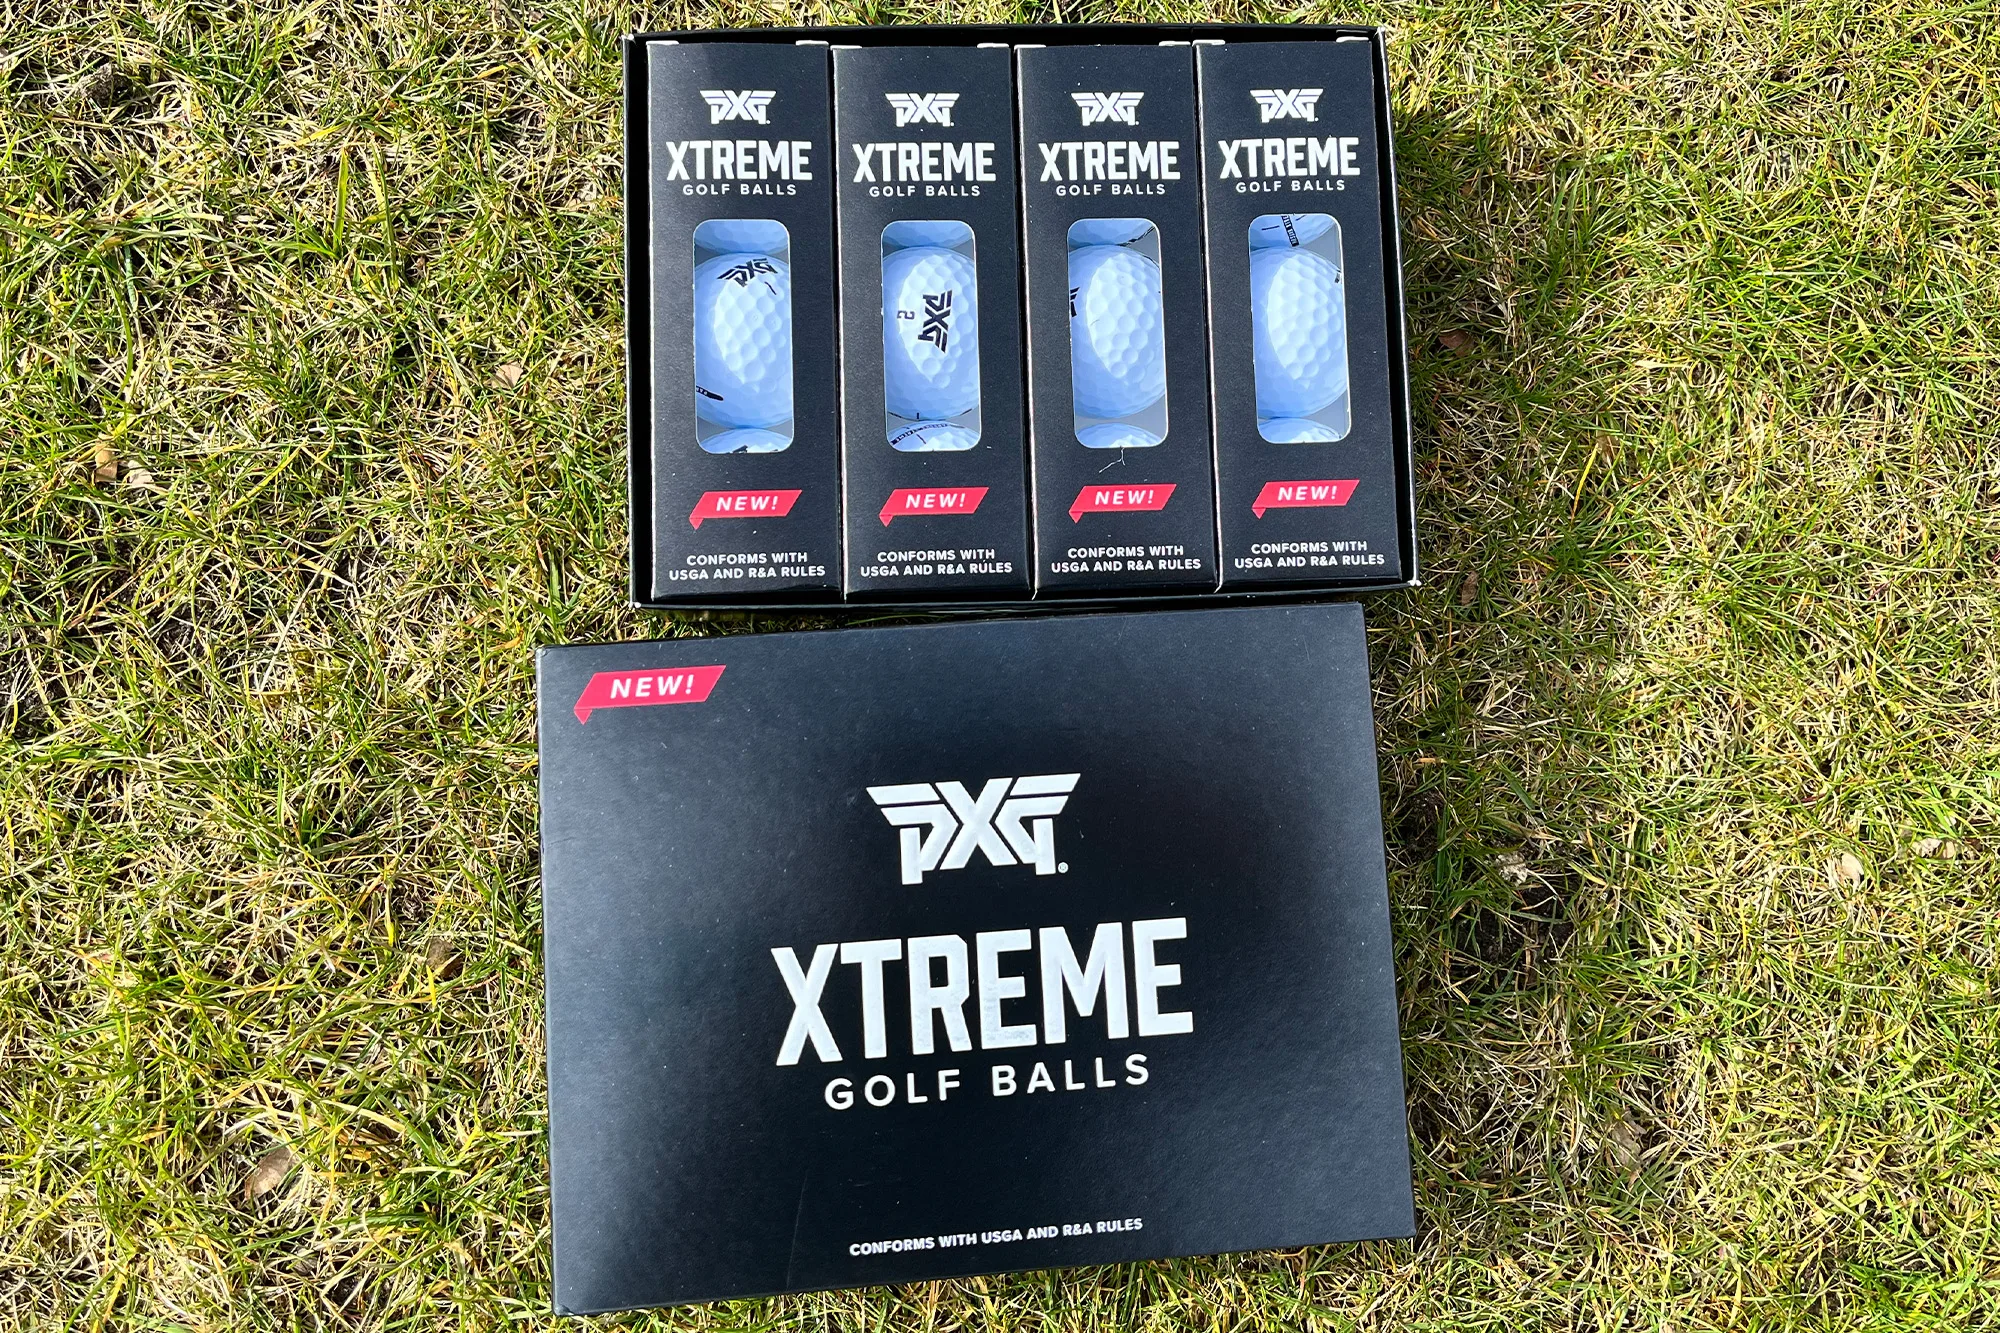 PXG Xtreme golf ball review